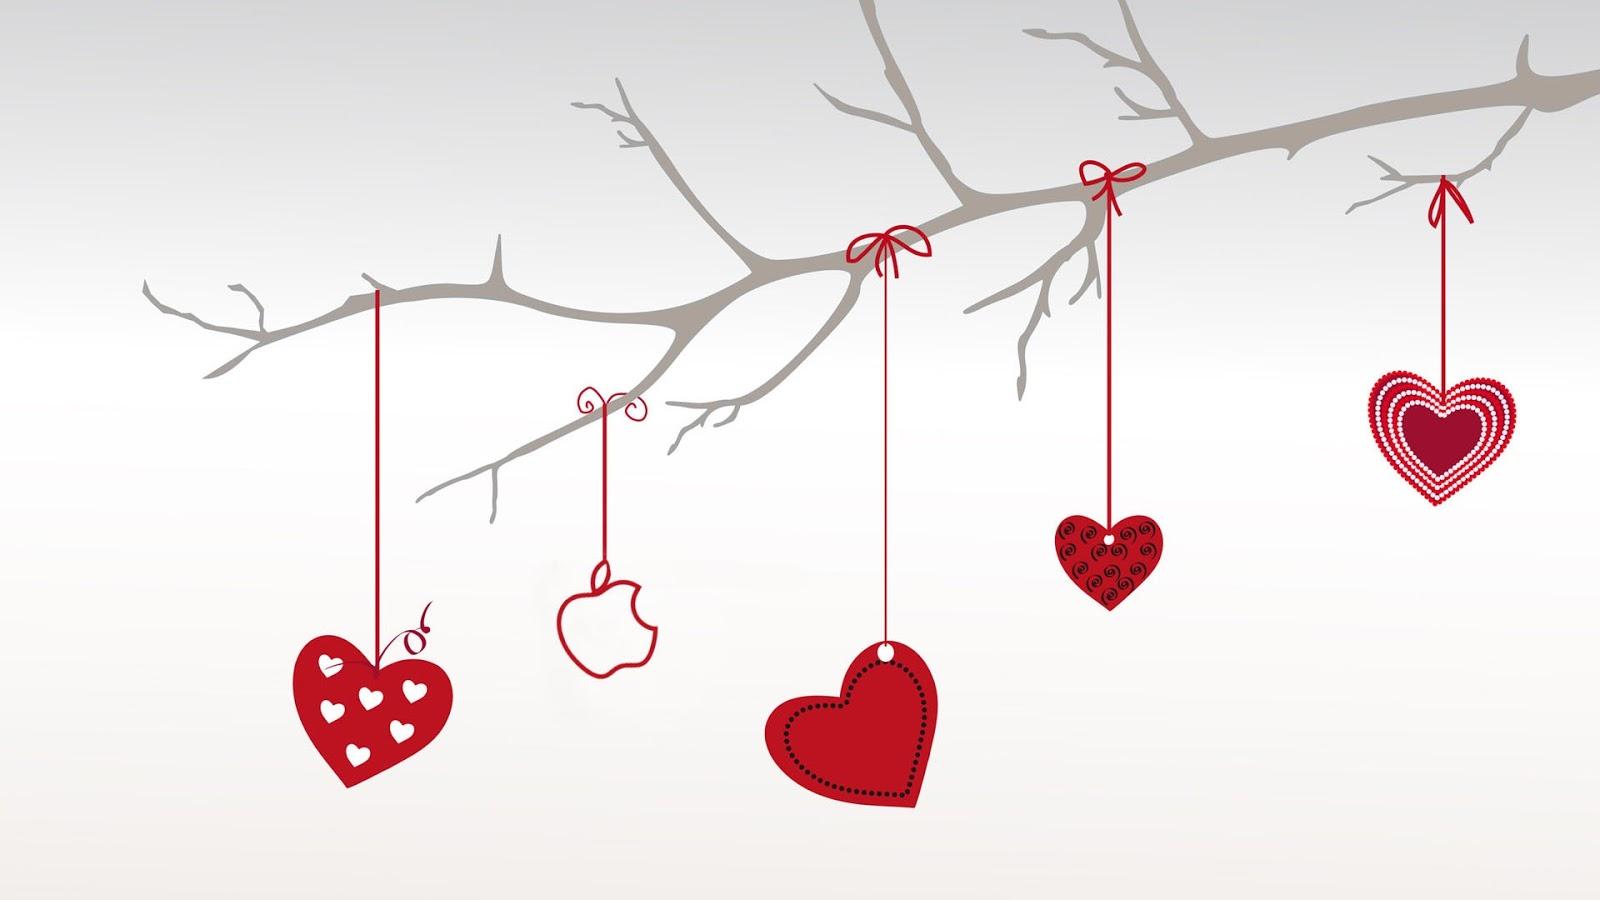 Free Valentine Wallpaper Android